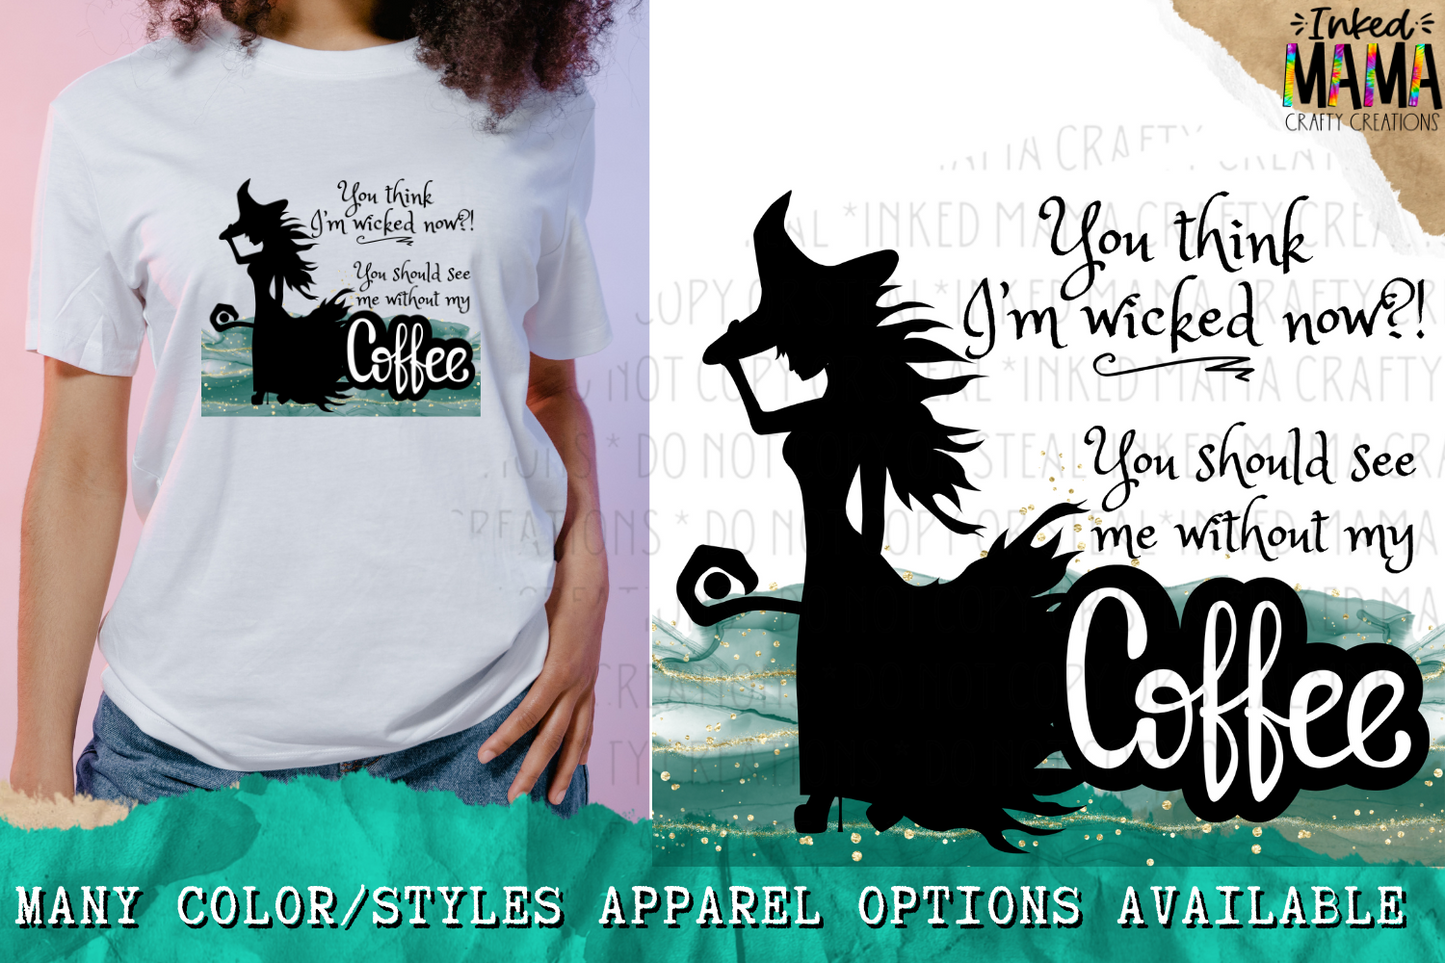 You think I’m wicked now?! You should see me without my coffee - Apparel